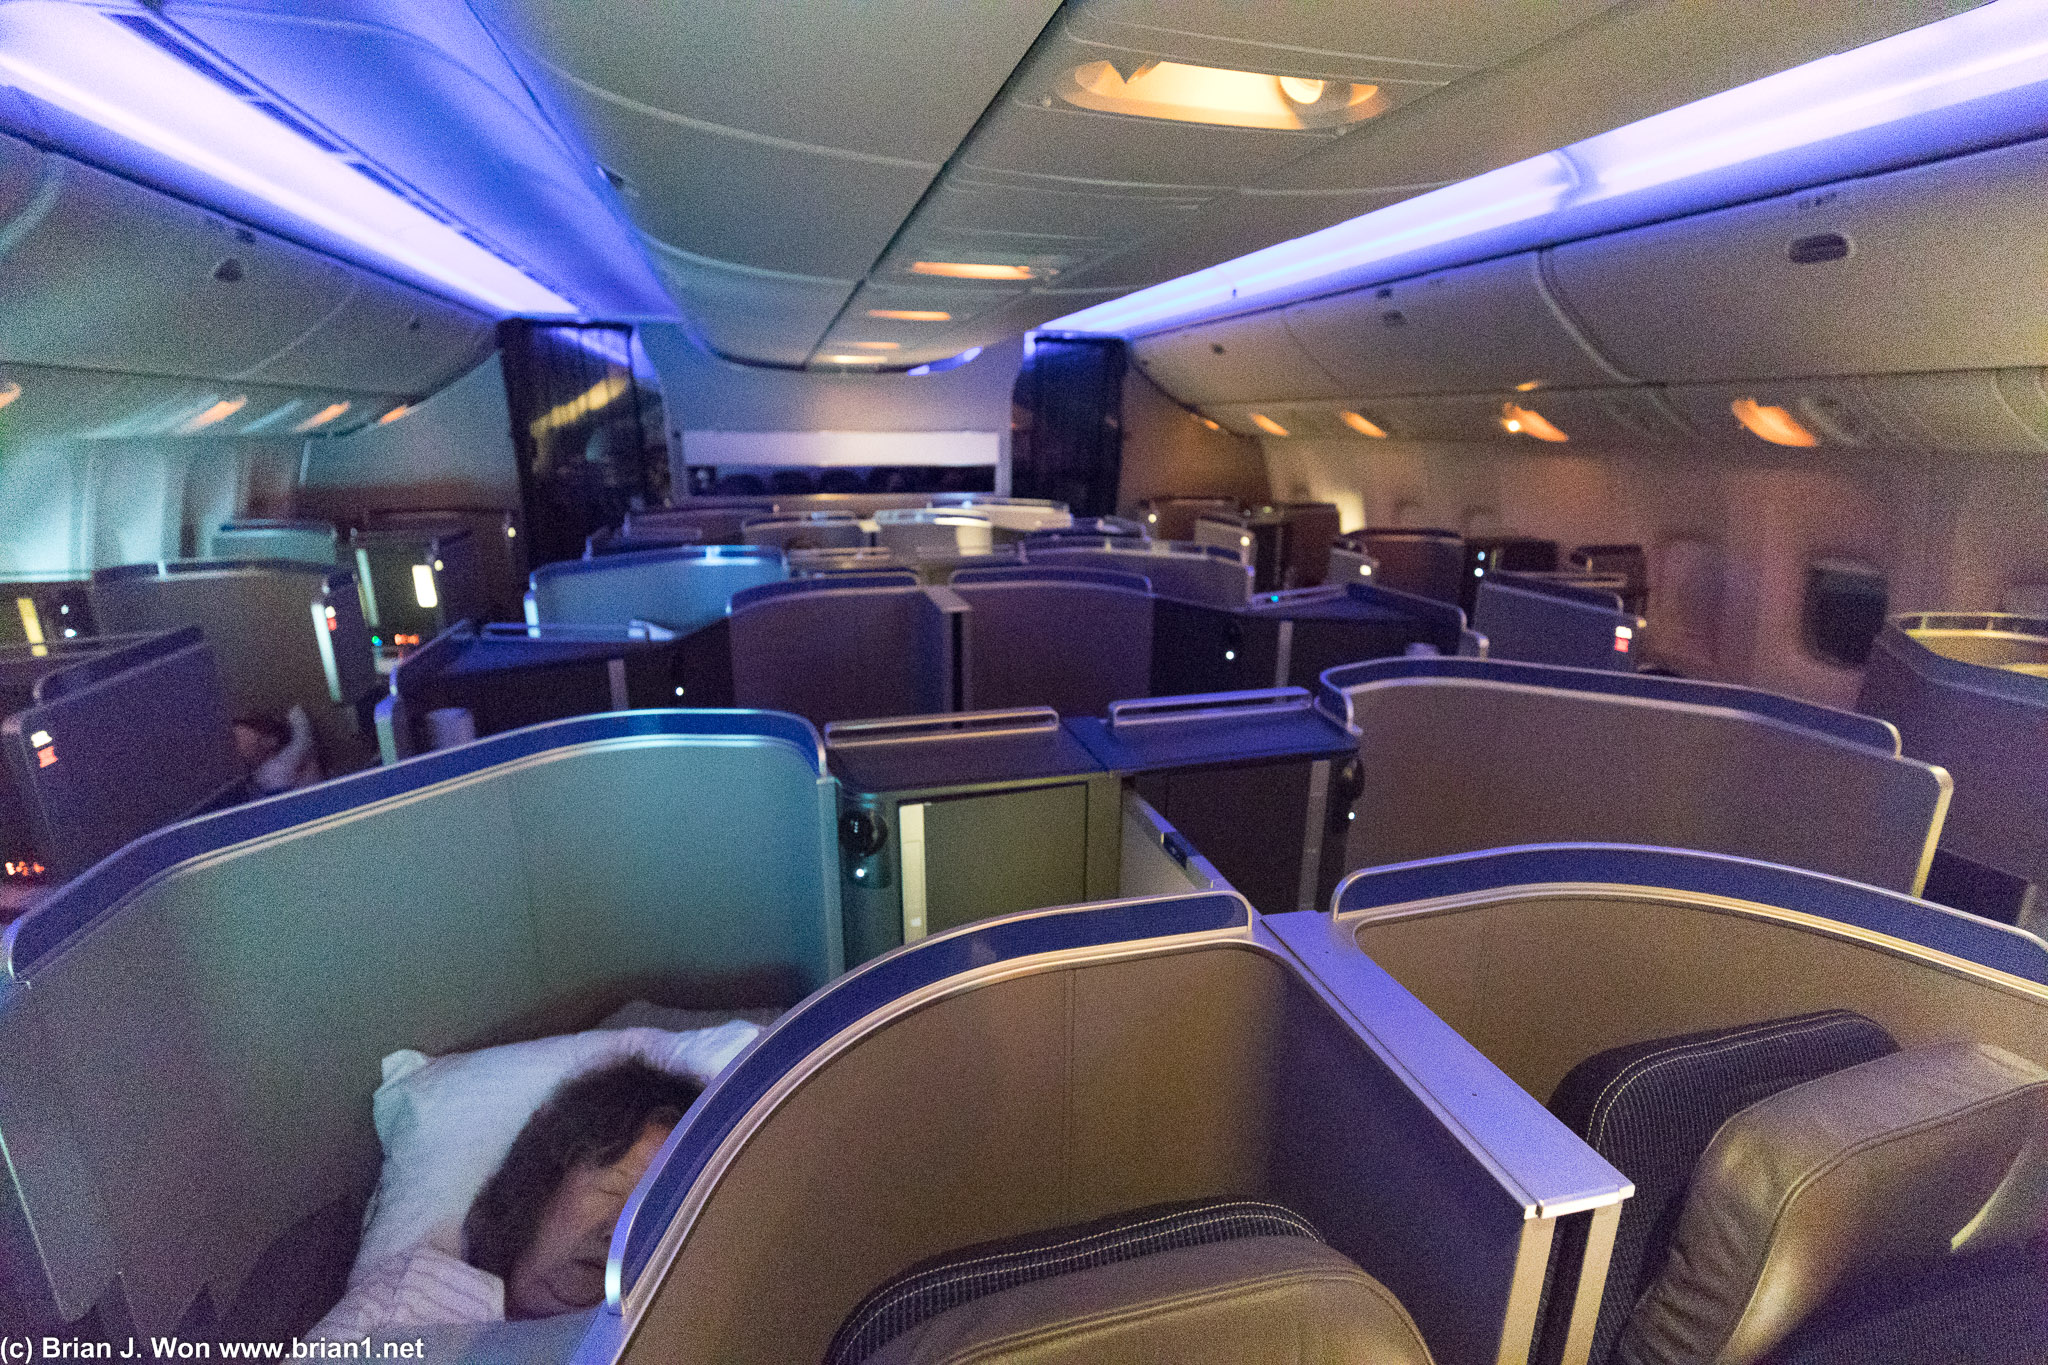 Not as nice as Qatar QSuites or Delta One, but not bad at all.